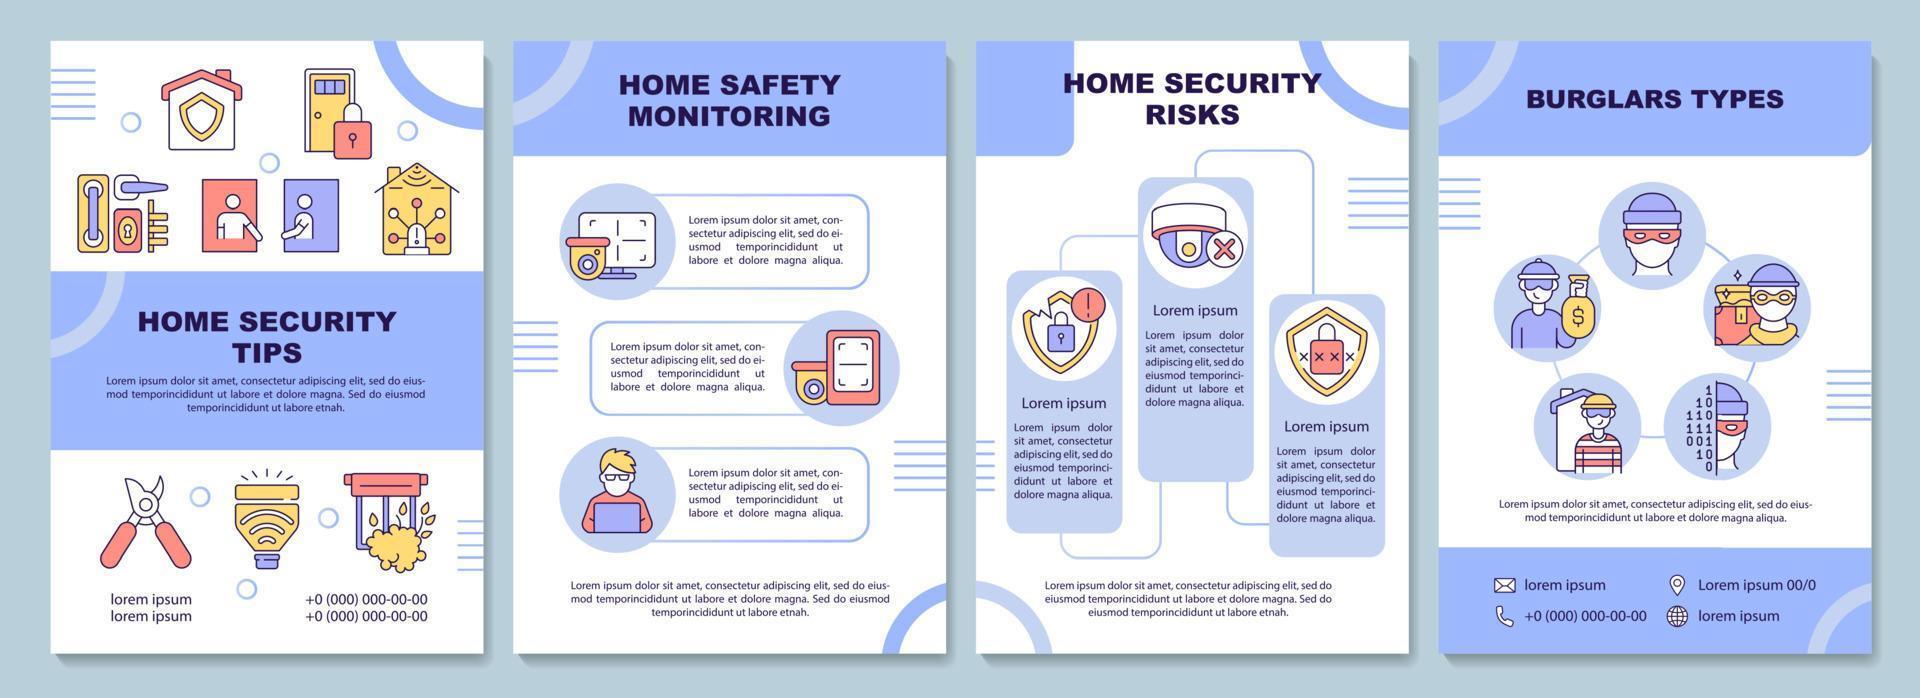 Home security tips brochure template vector